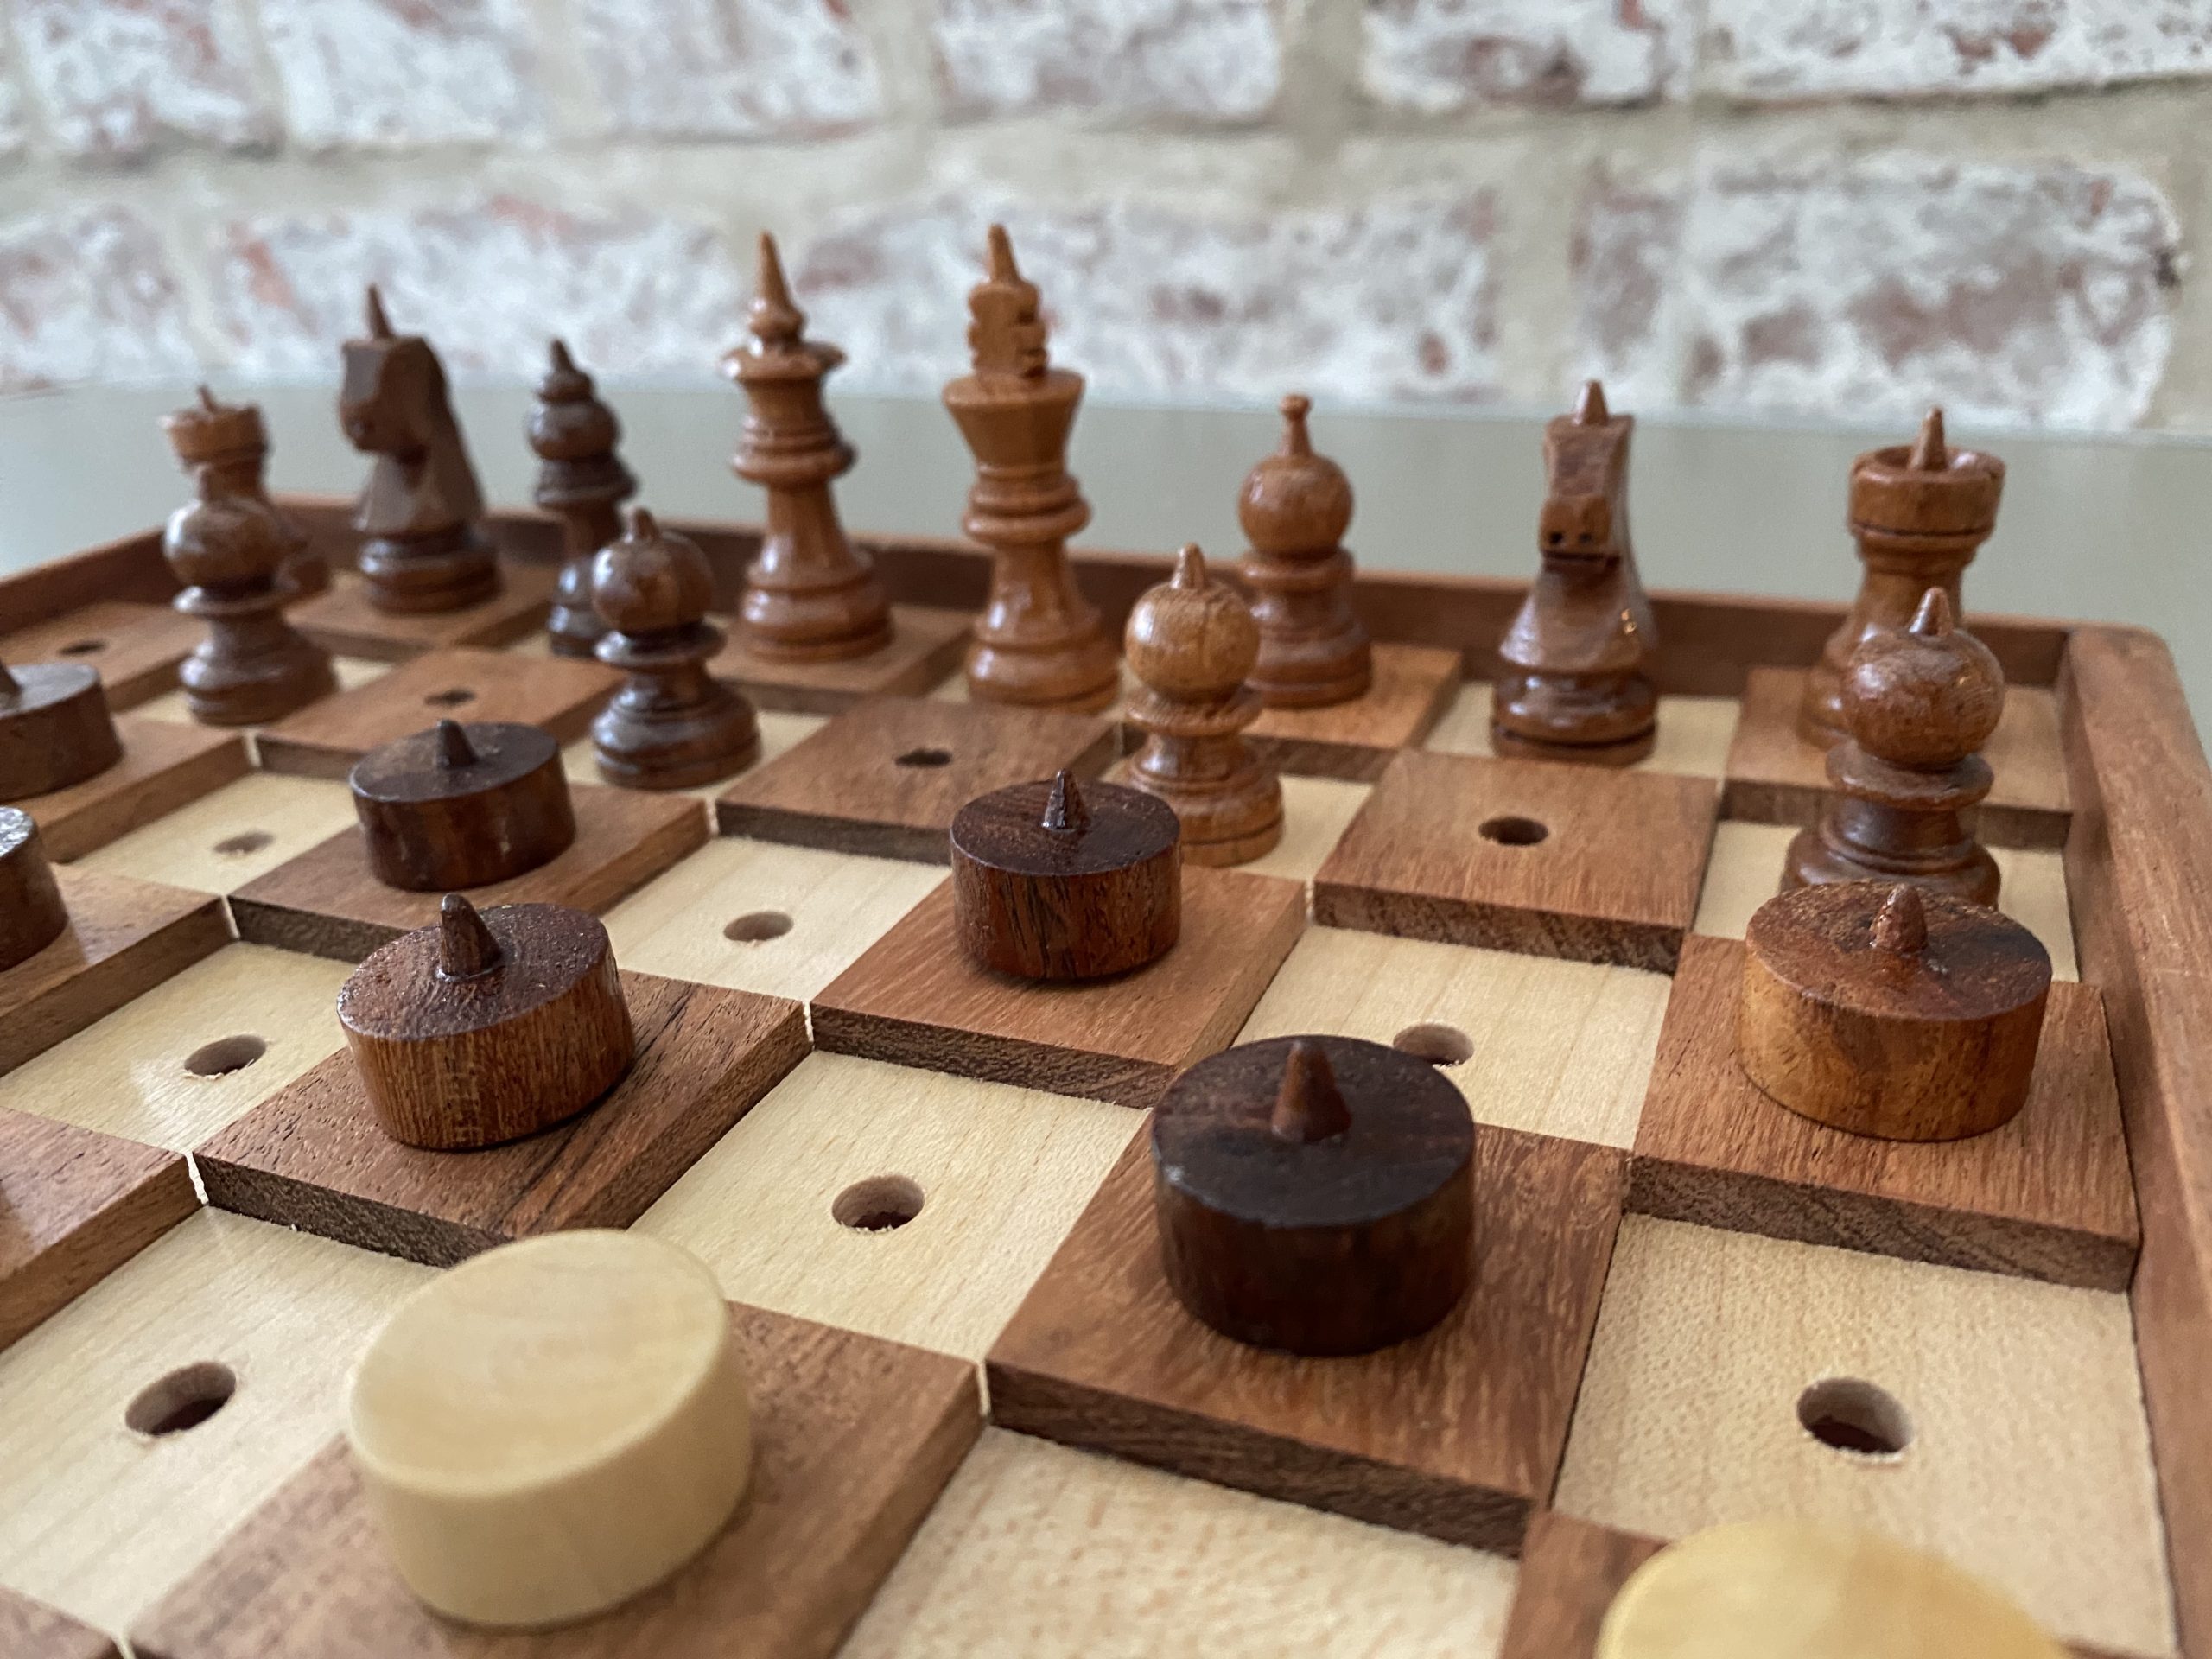 13.20 wooden chess for blind people